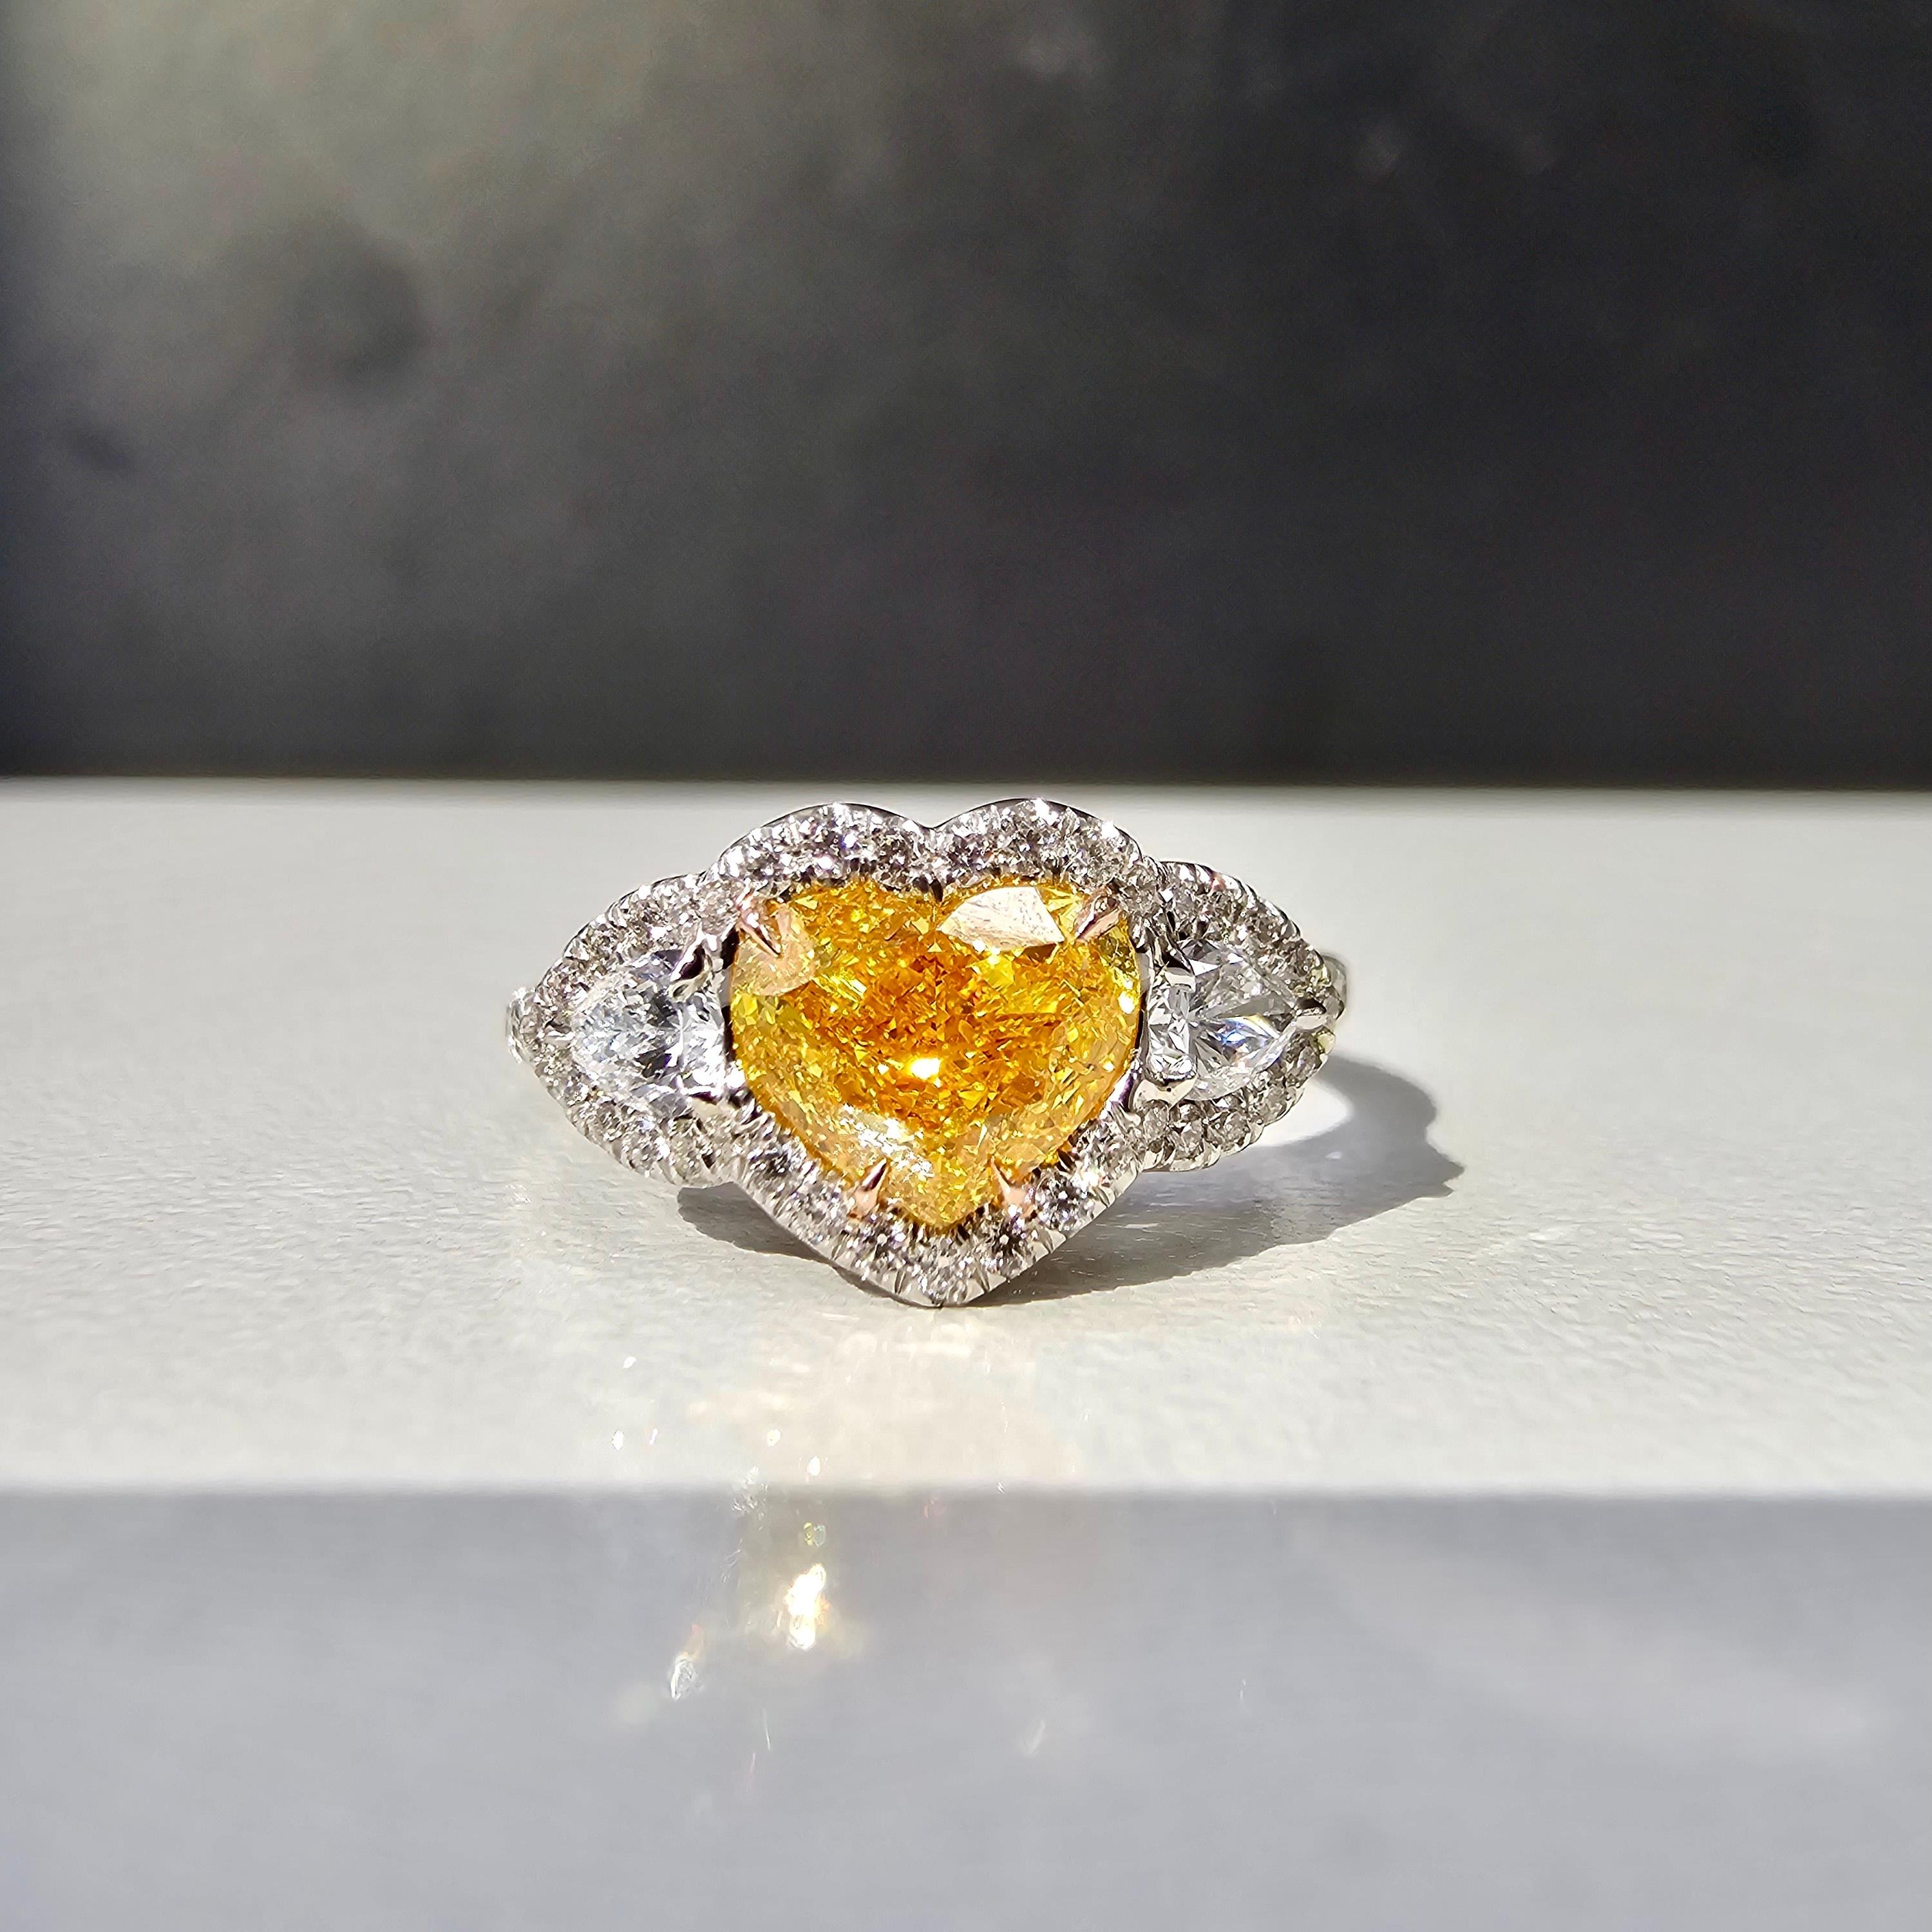 Rare and beautiful 1ct Fancy Vivid Orange Yellow Heart with VS clarity. The diamond faces up completely orange!
This diamond is absolutely on fire with no bow tie, but pure scintillation throughout the stone
Handmade Platinum ring with 0.29ct of